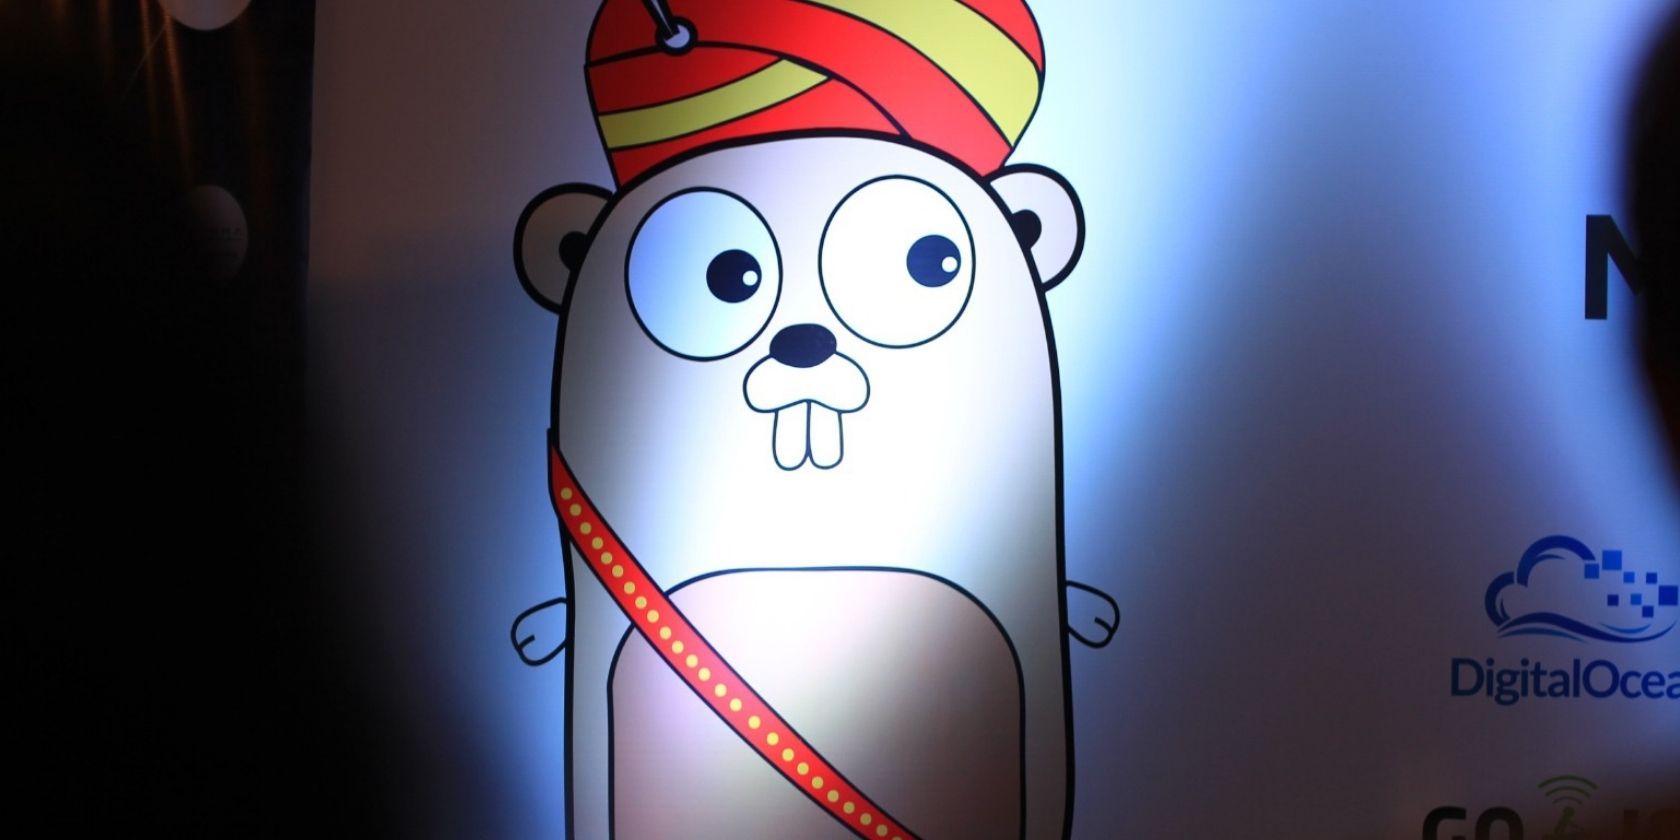 The Golang mascot, a cartoon gopher with prominent teeth and large eyes